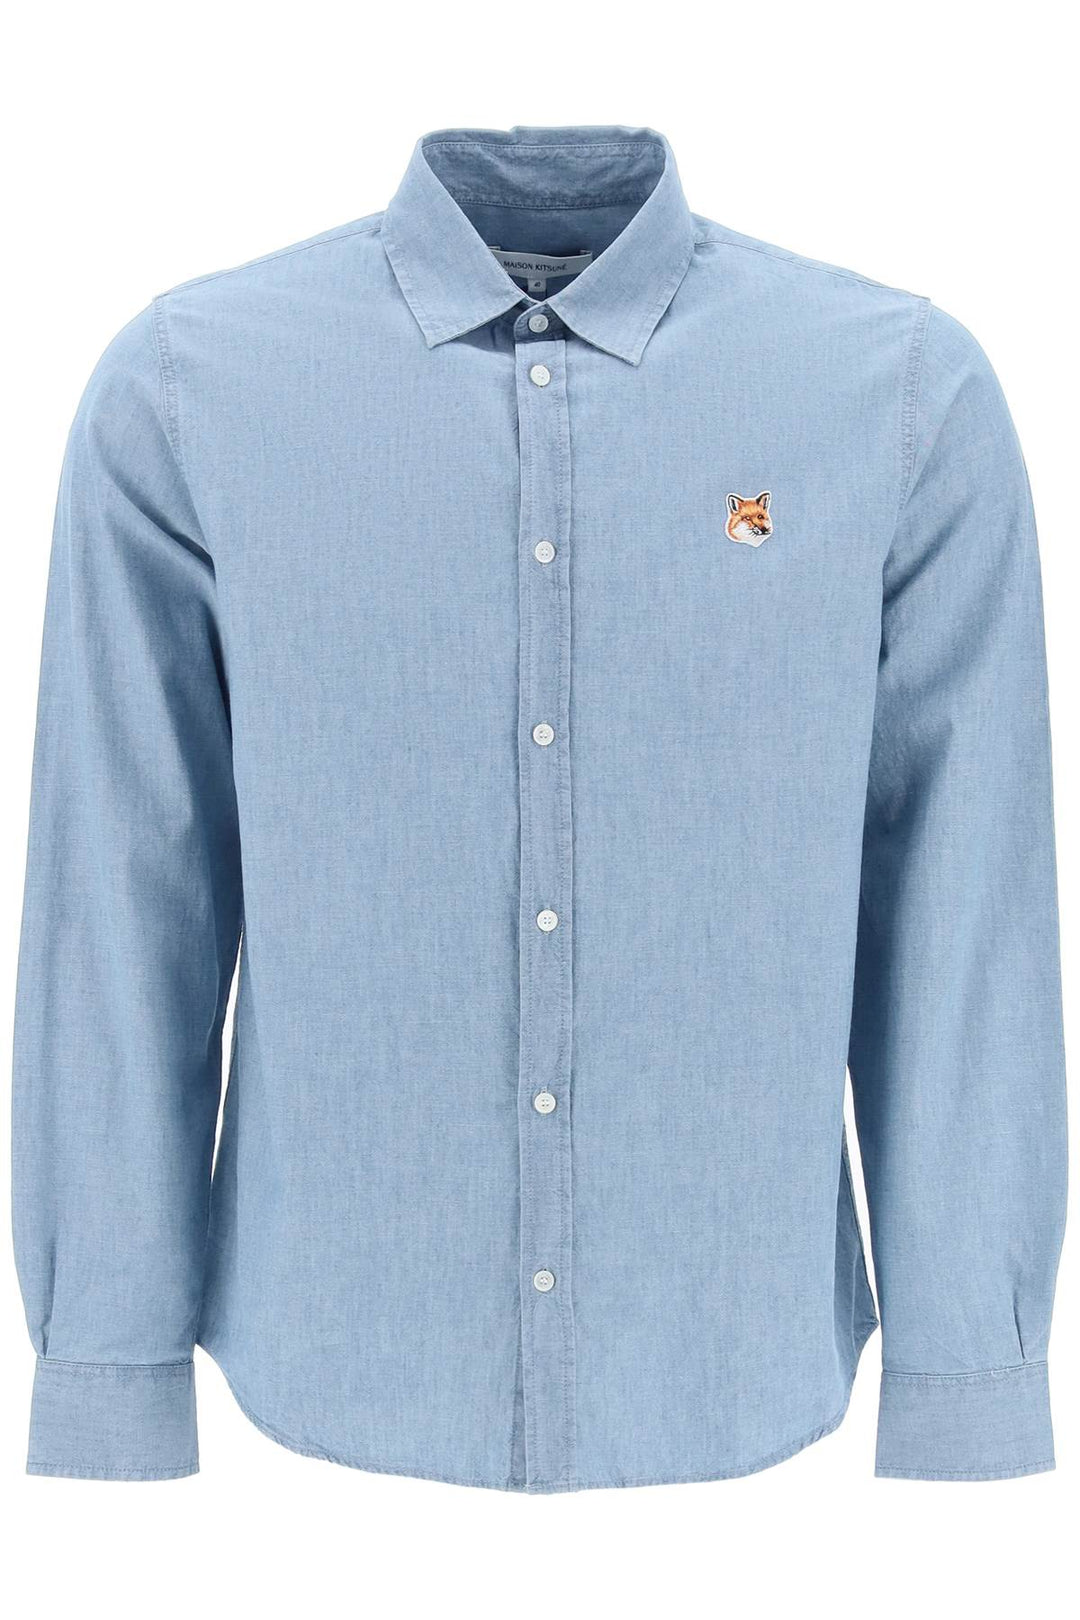 Maison Kitsune Replace With Double Quotefox Head Cotton Chambray Shirtreplace With Double Quote   Blu